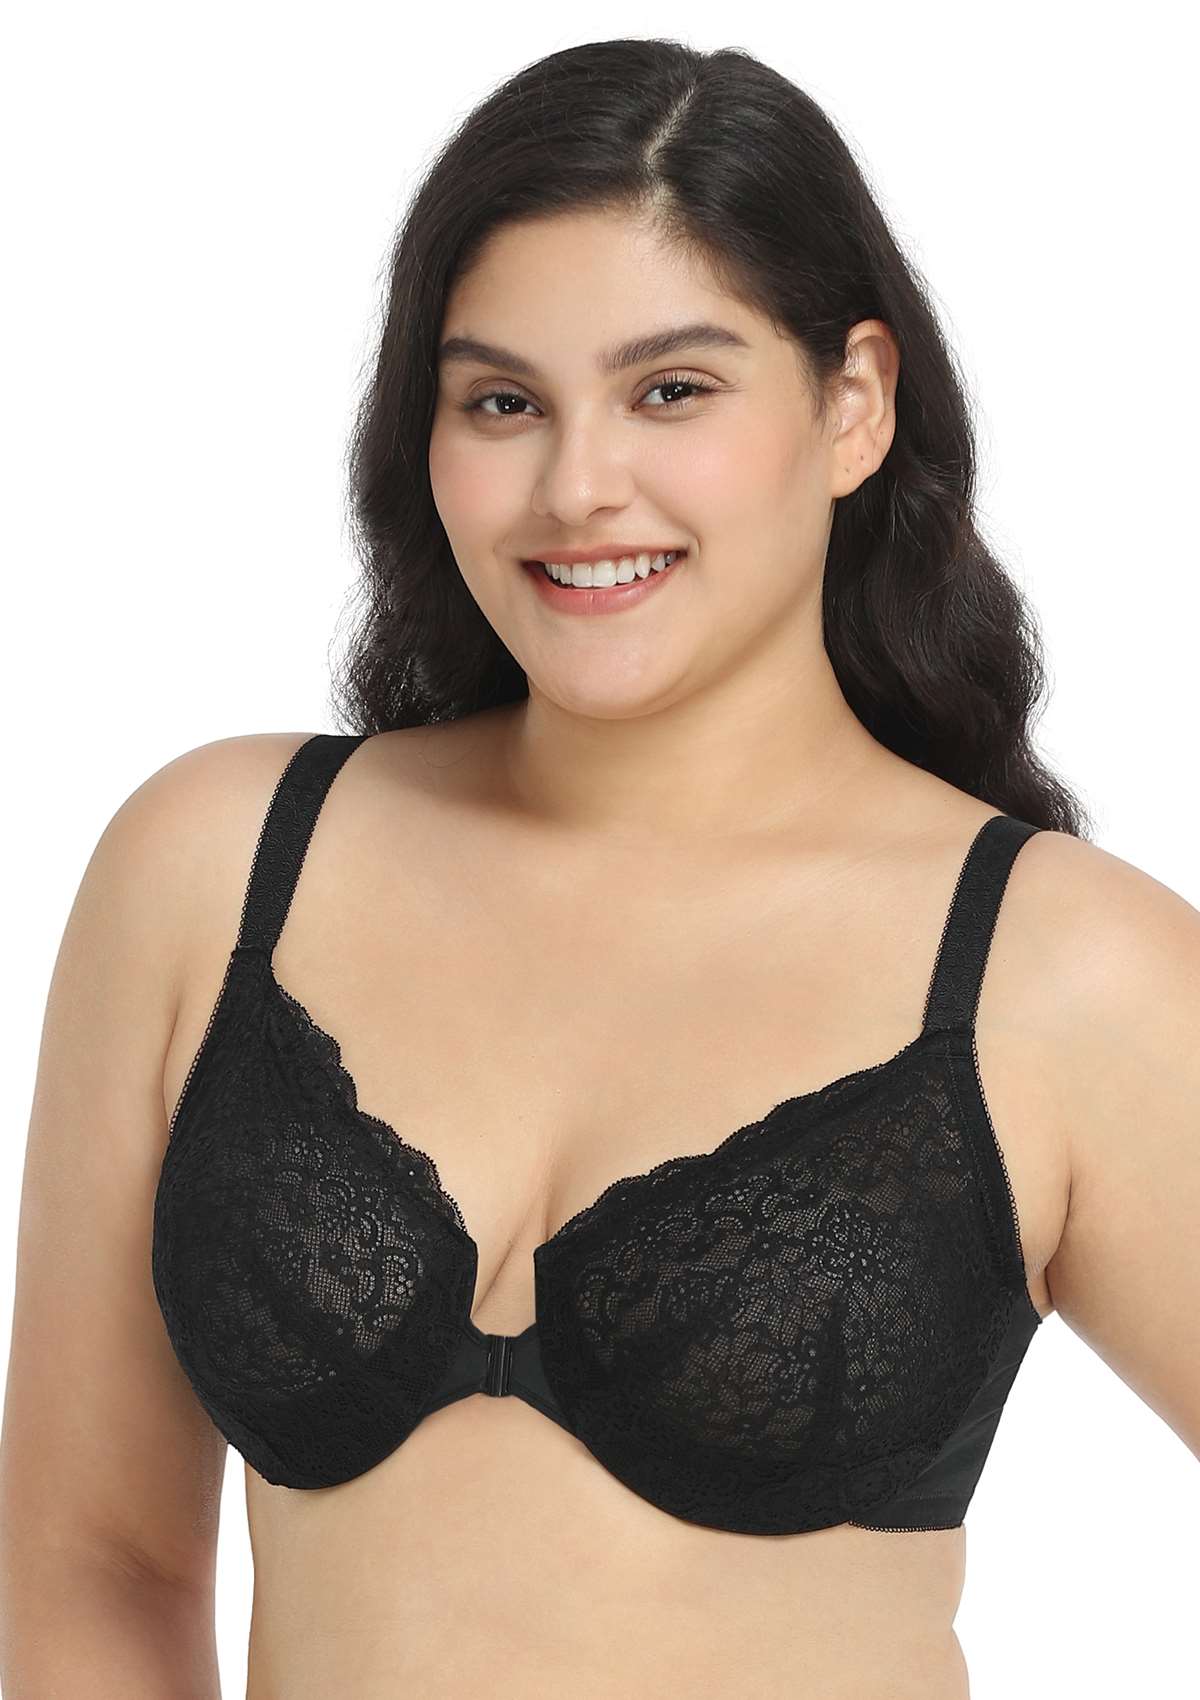 HSIA Nymphaea Front-Close Unlined Retro Floral Lace Back Smoothing Bra - Black / 36 / DDD/F